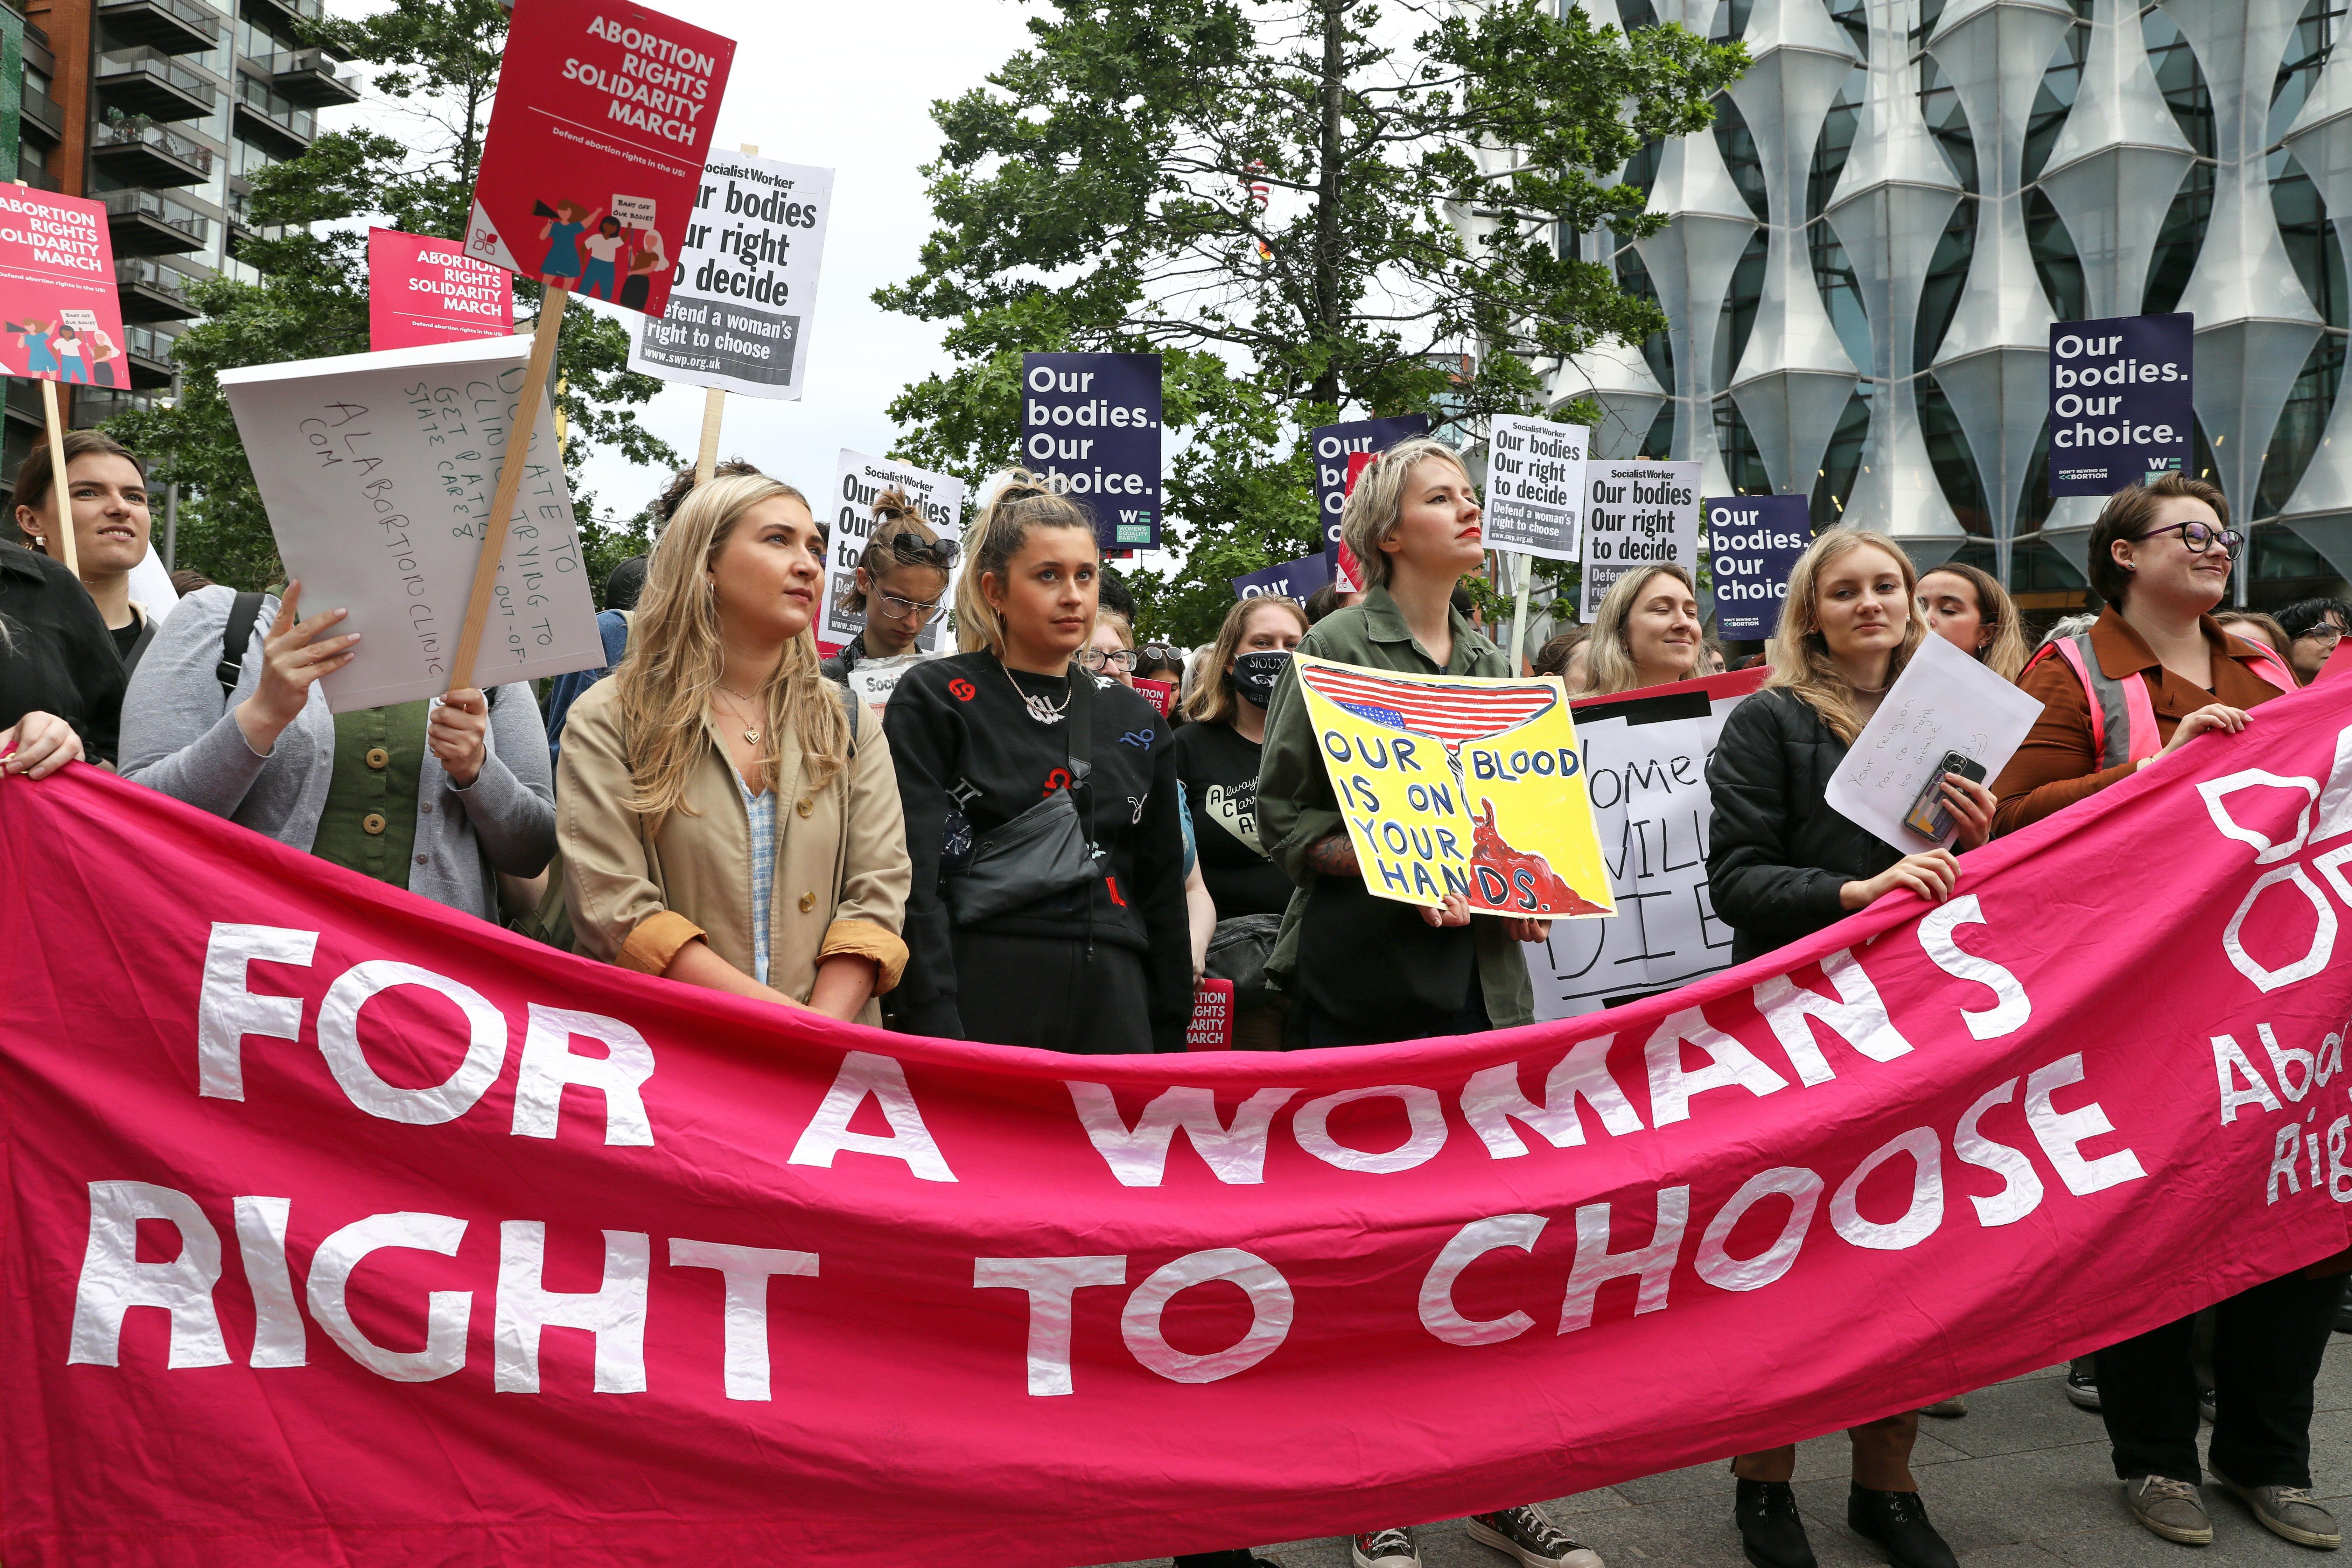 Demonstrators gather outside the United States embassy in Vauxhall, south London to protest against the decision to end constitutional protections for abortion in the US